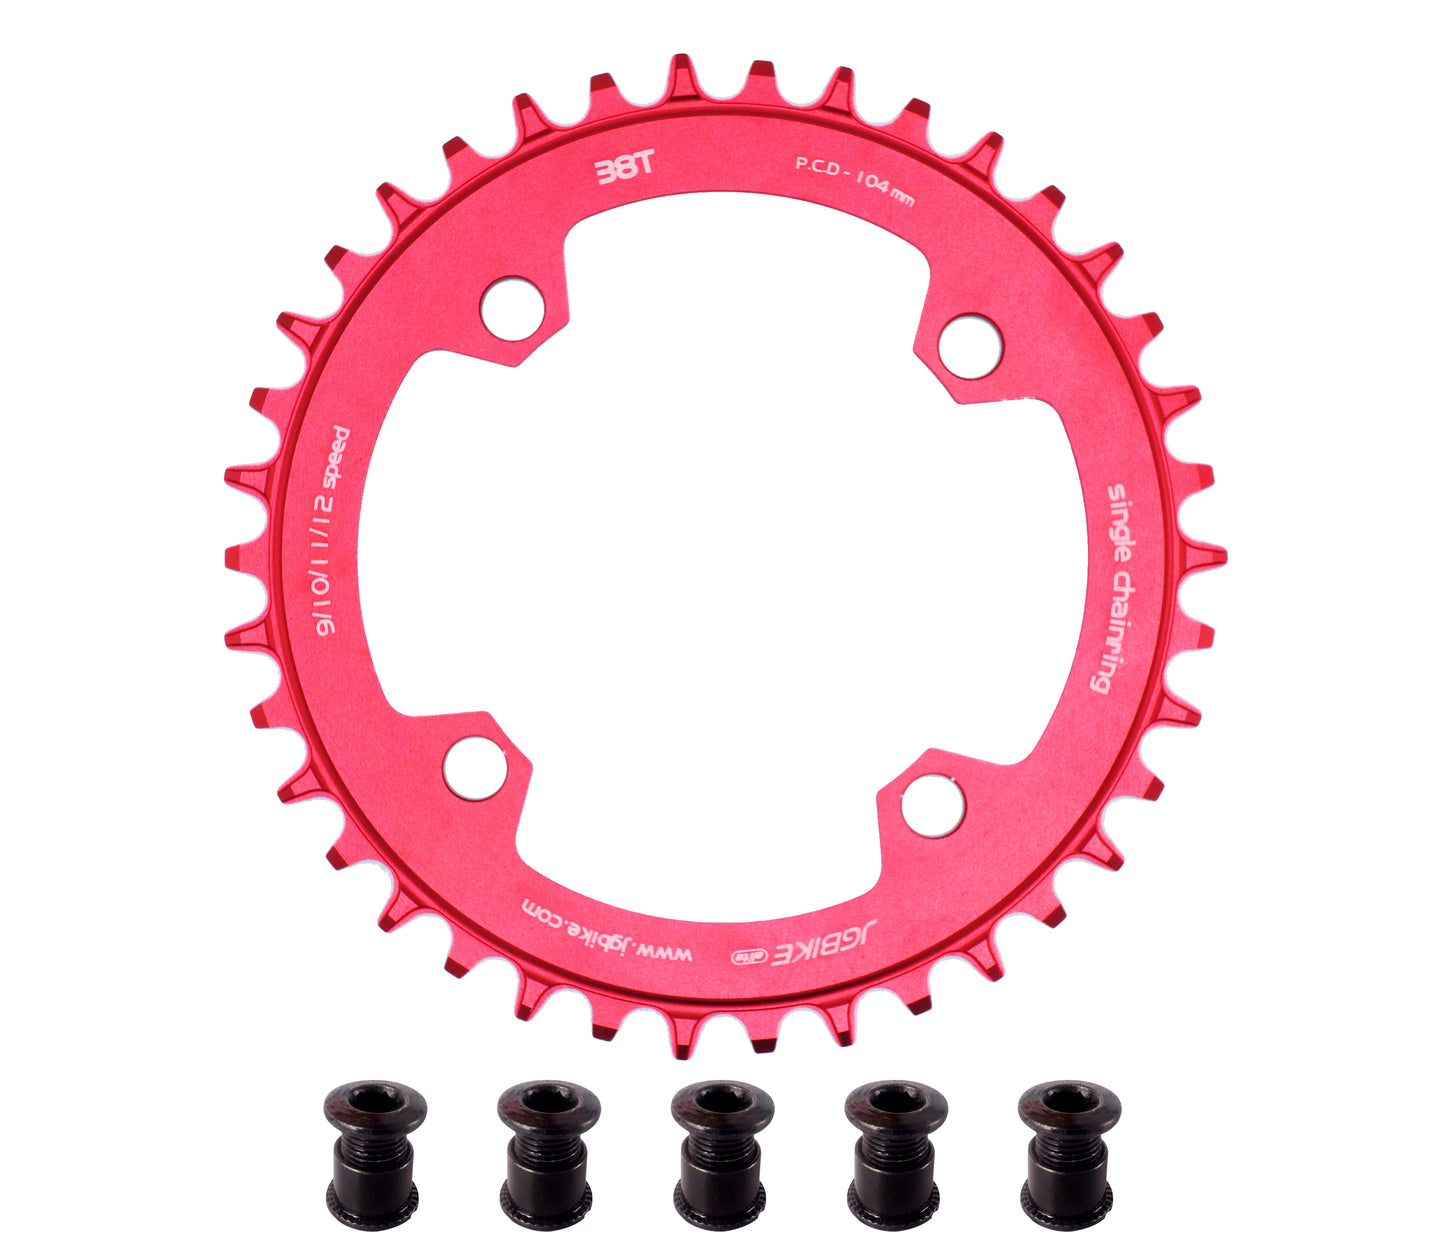 JGbike Round Oval Chainring 104mm BCD Narrow Wide for 8 9 10 11 12 Speed MTB XC Trail Mountain Bike Bicycle